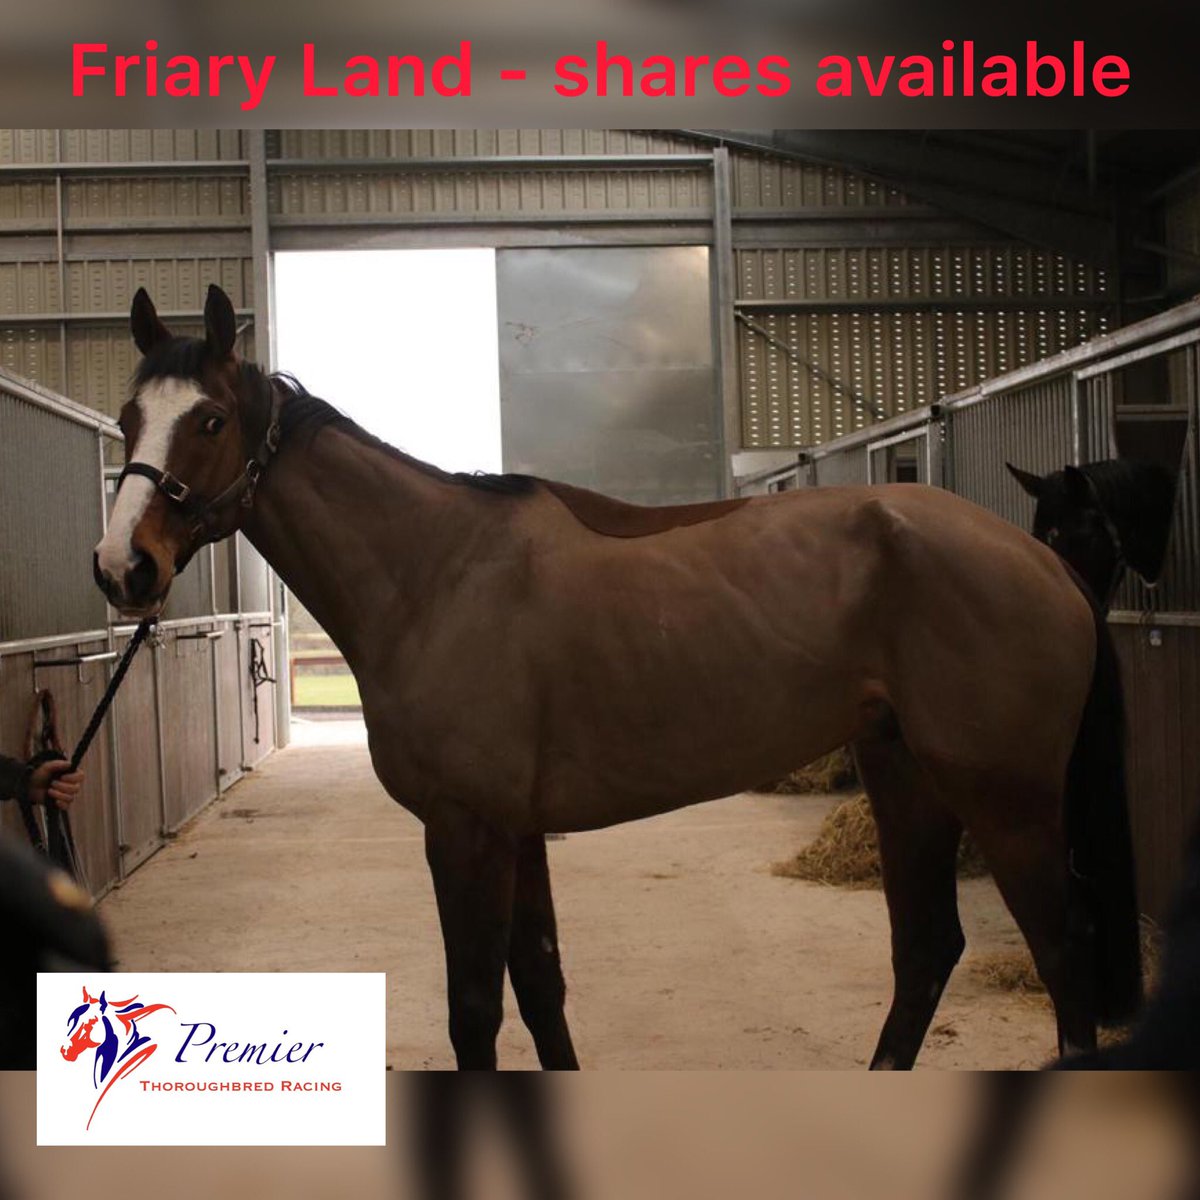 We are delighted to have acquired Friary Land to go into training with @O_J_murphy91! Shares are available from as little as £16.35/week! Get in touch with the team for more information - info@pt-racing.co.uk #RacehorseOwnership